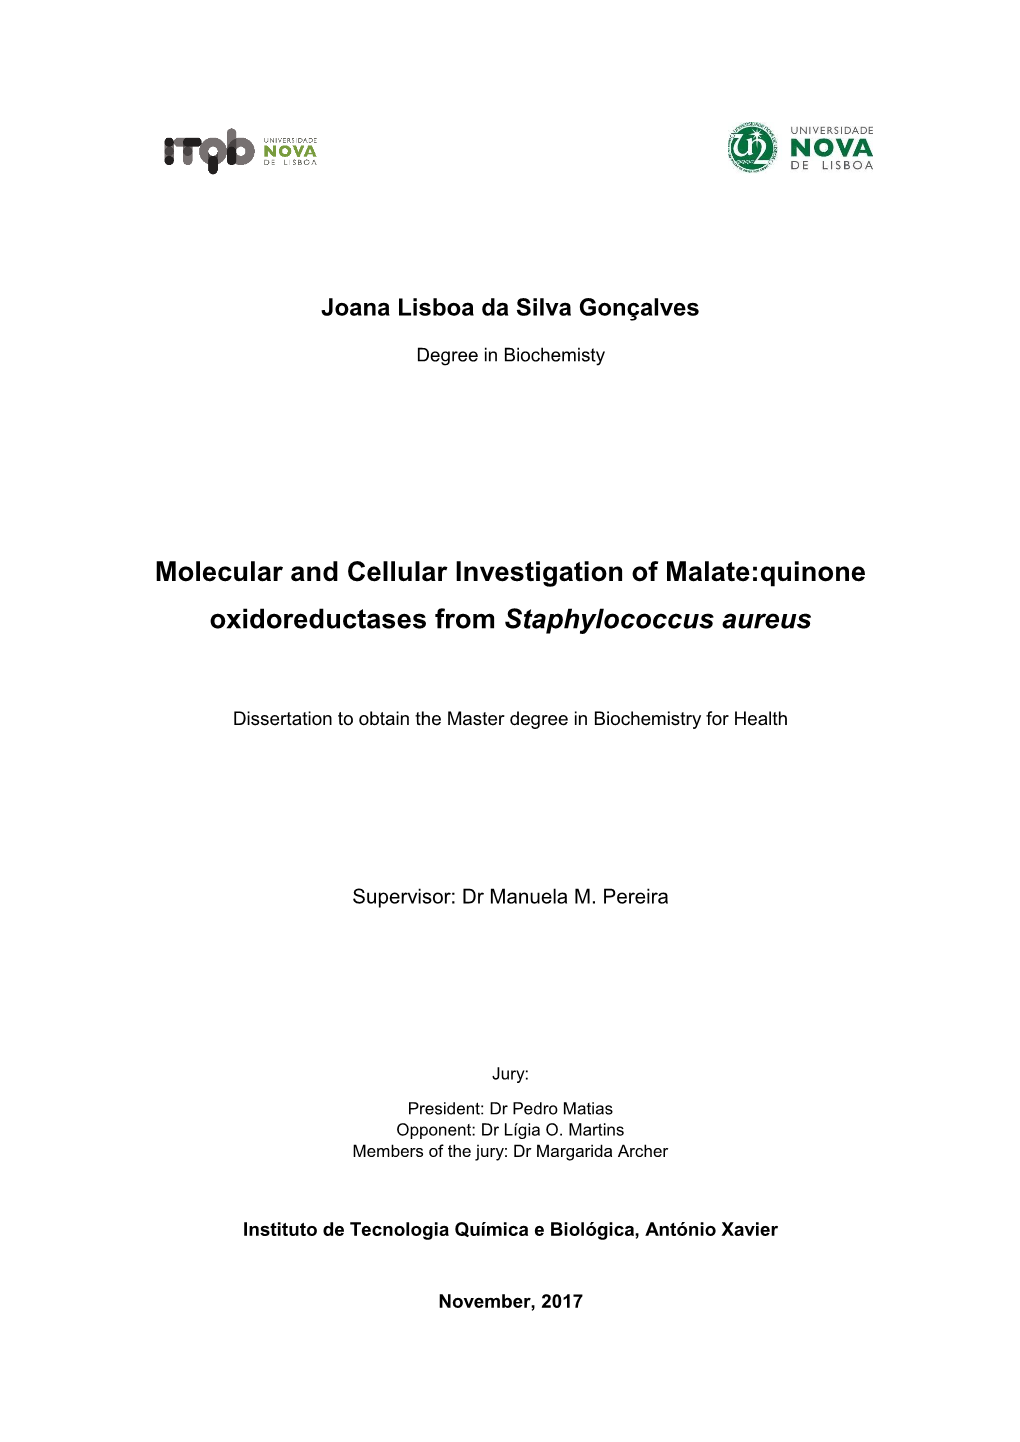 Molecular and Cellular Investigation of Malate:Quinone Oxidoreductases from Staphylococcus Aureus